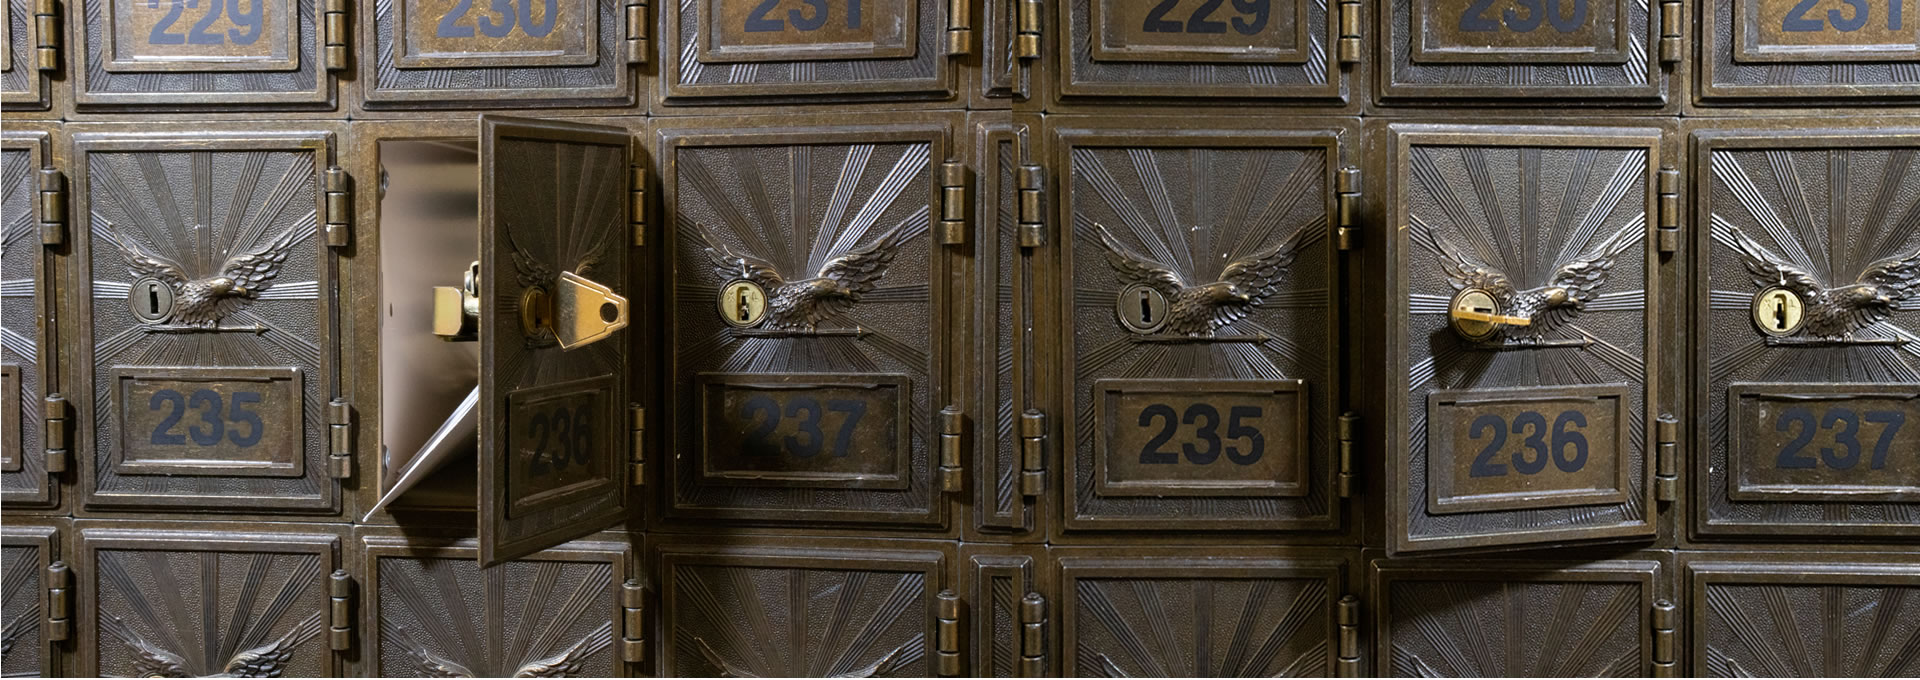 WALL STREET MAILBOXES